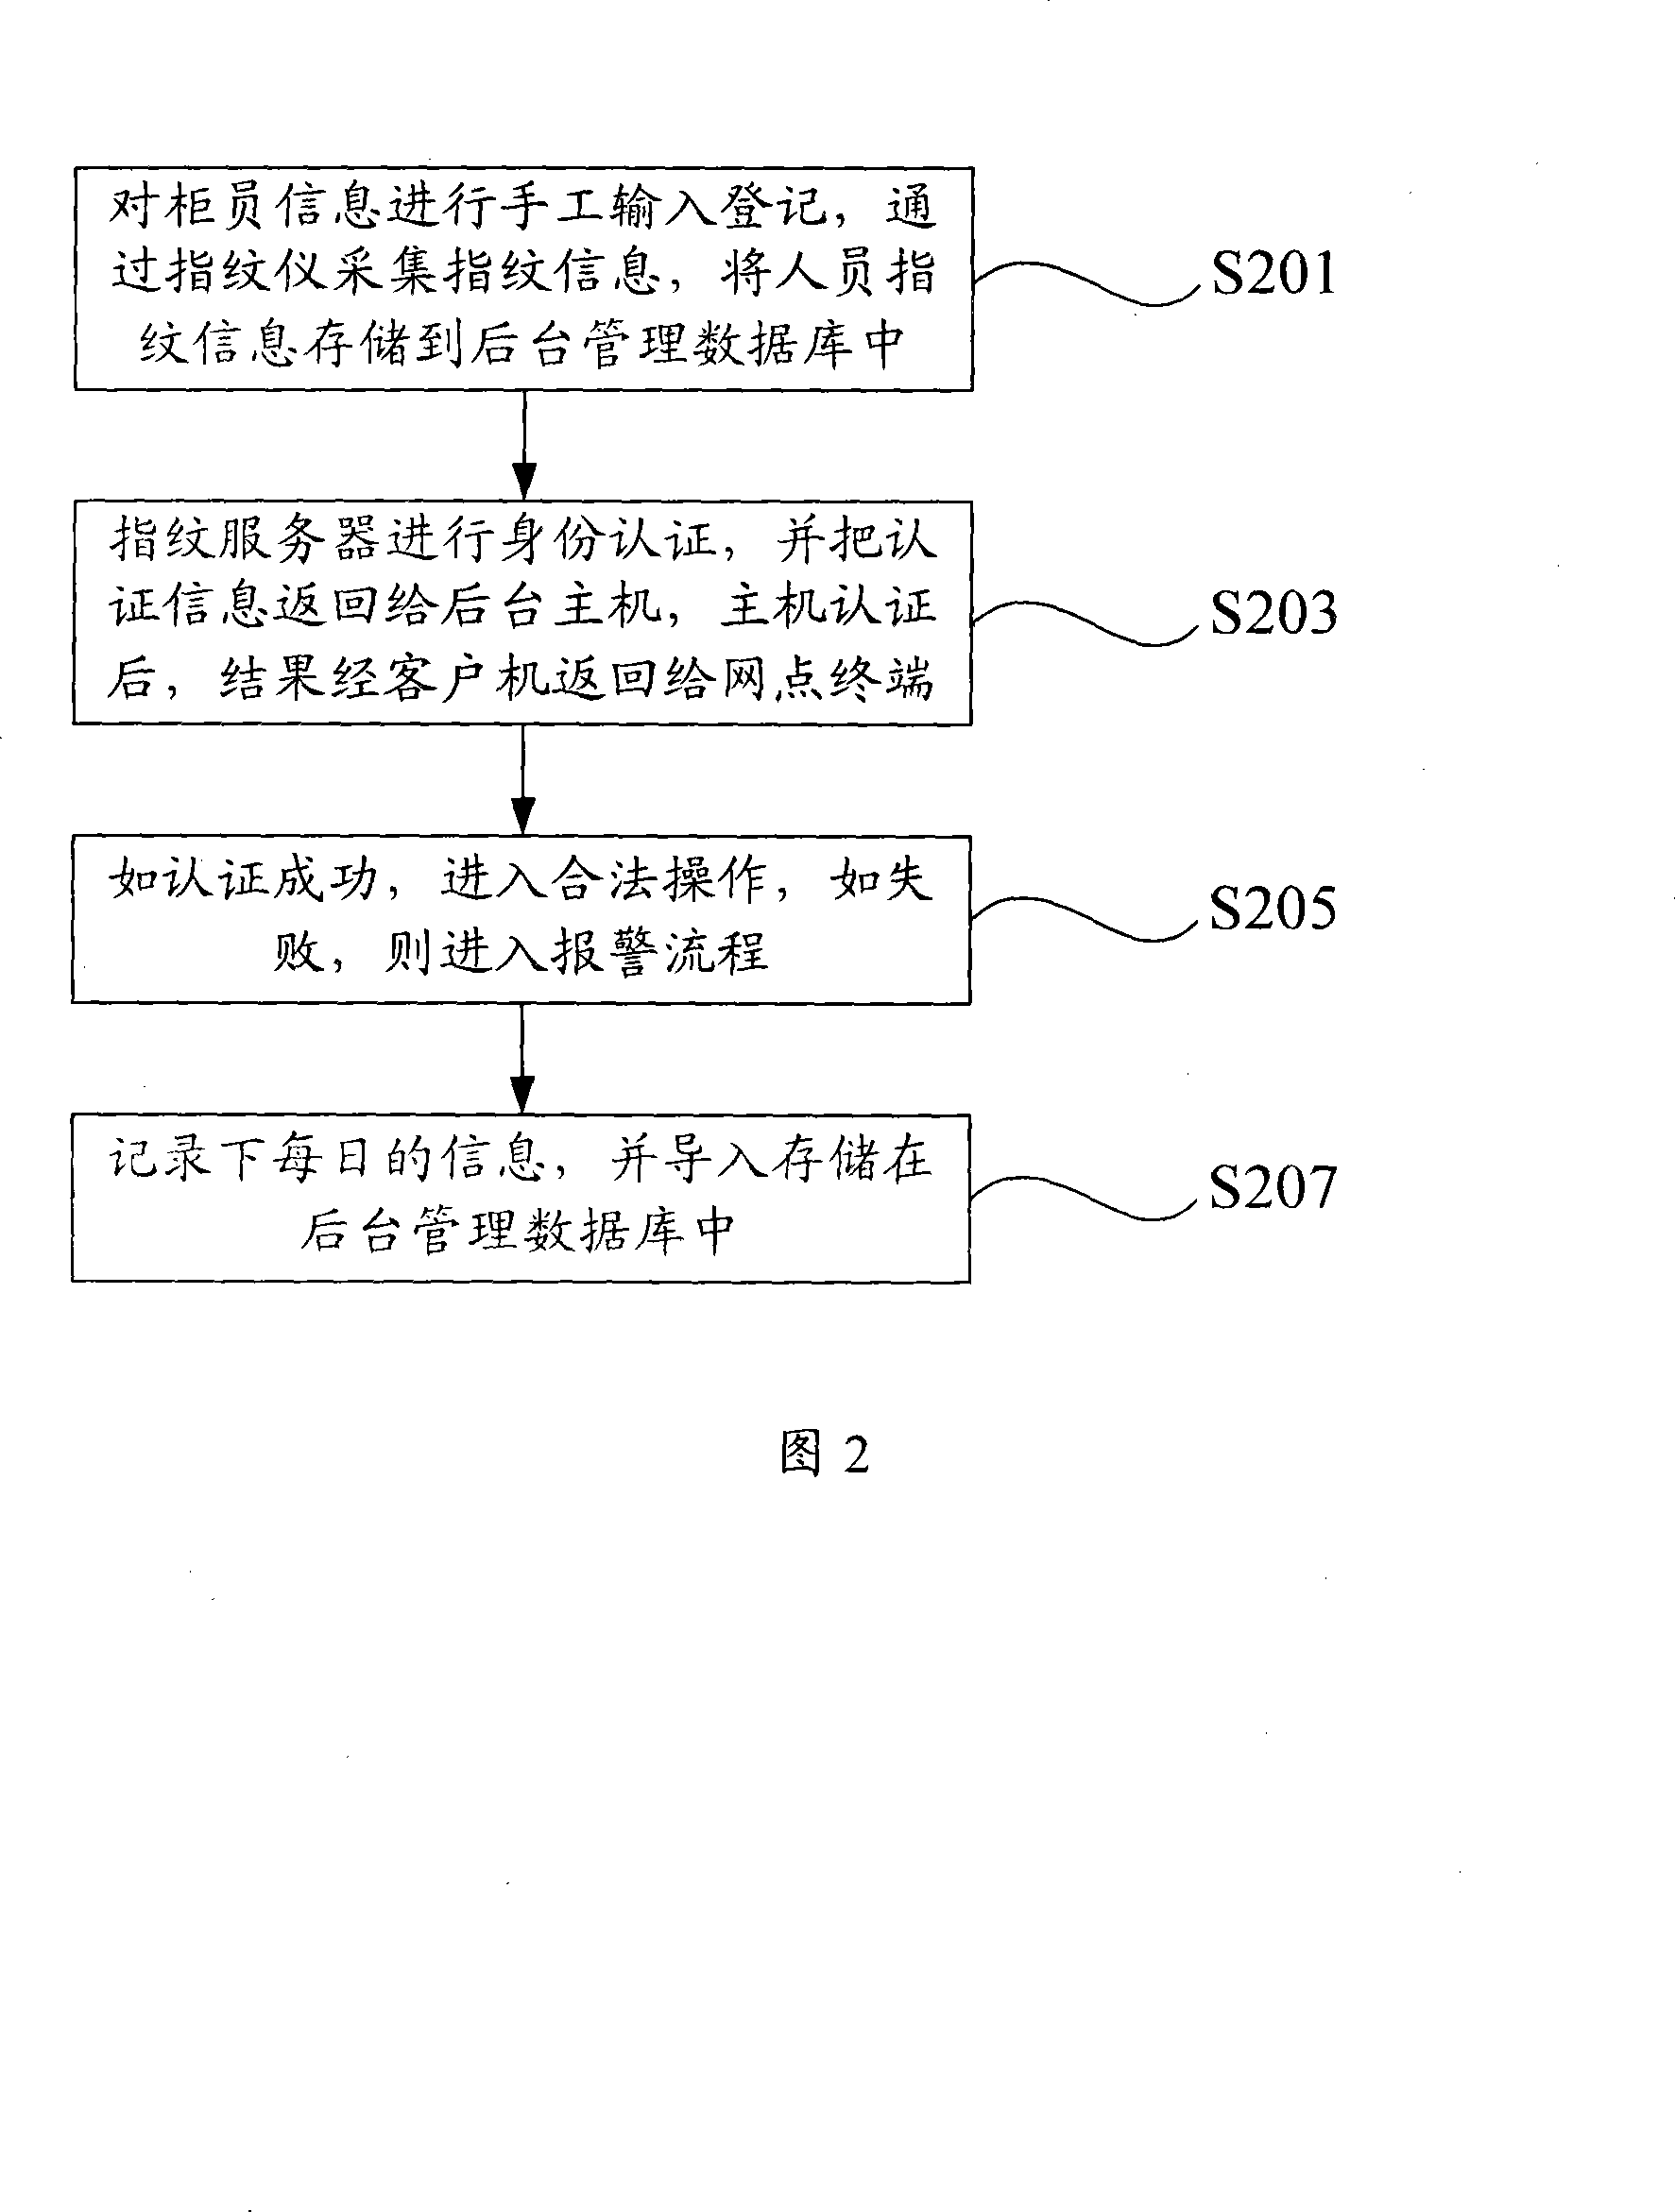 Counter employee identity authentication system and method